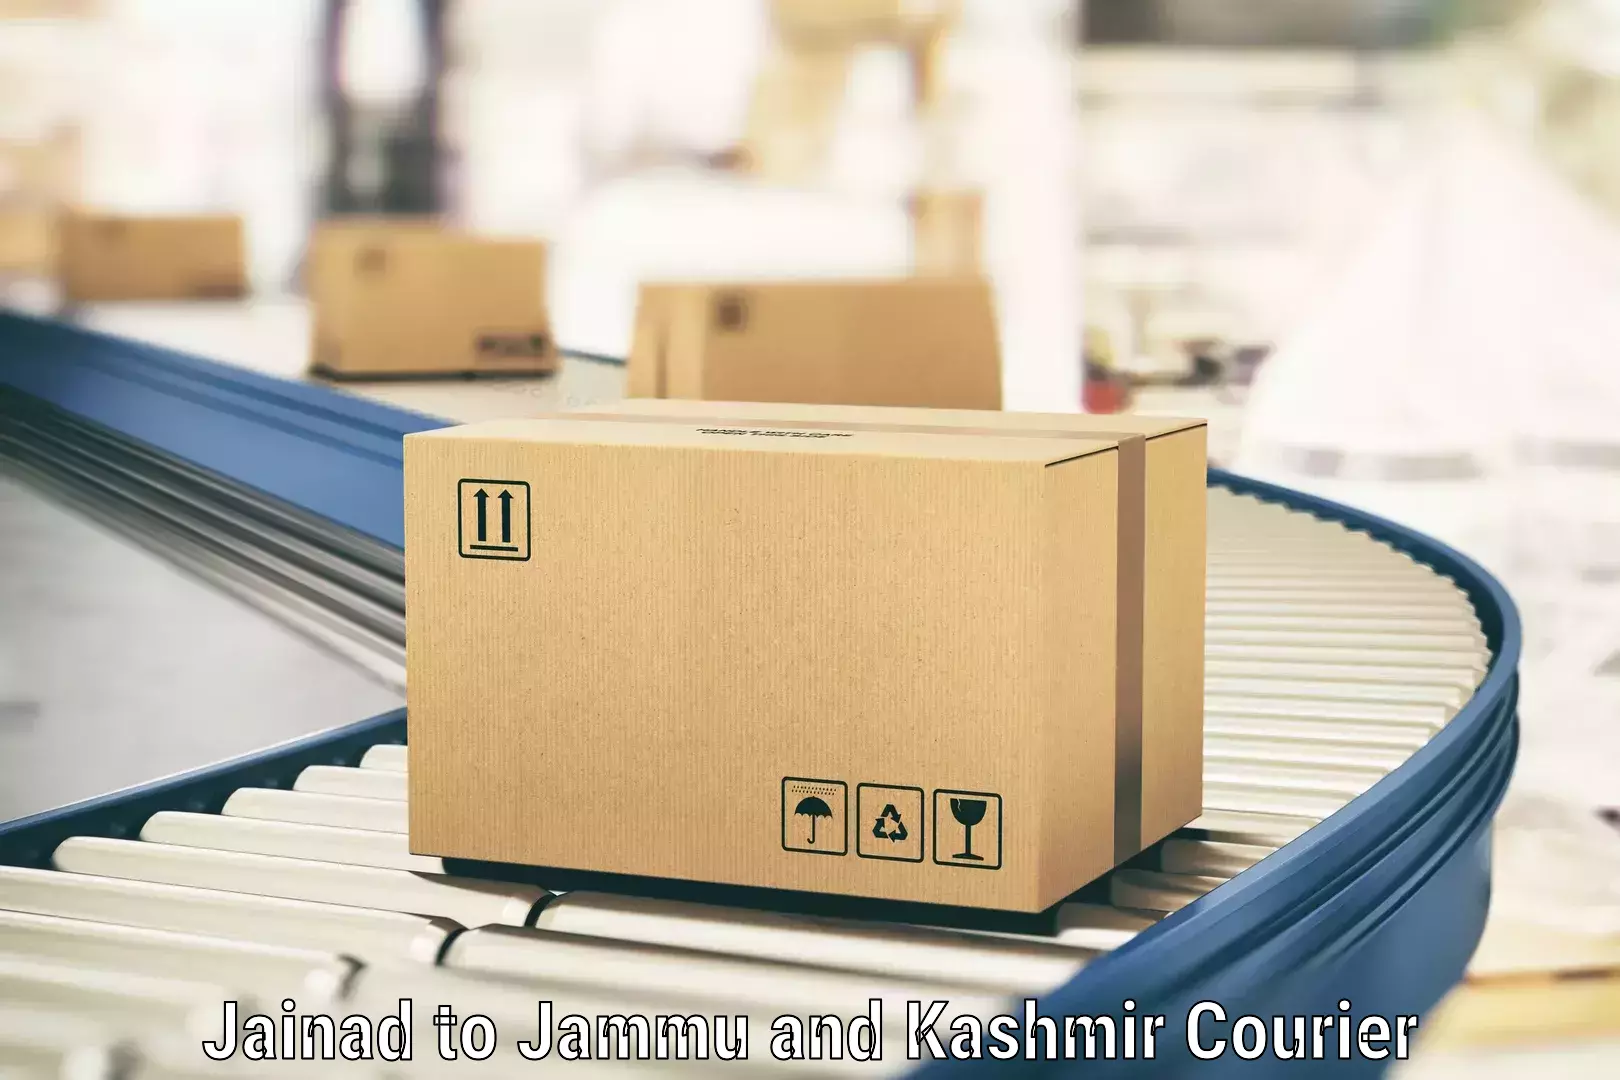 Global shipping networks in Jainad to Baramulla